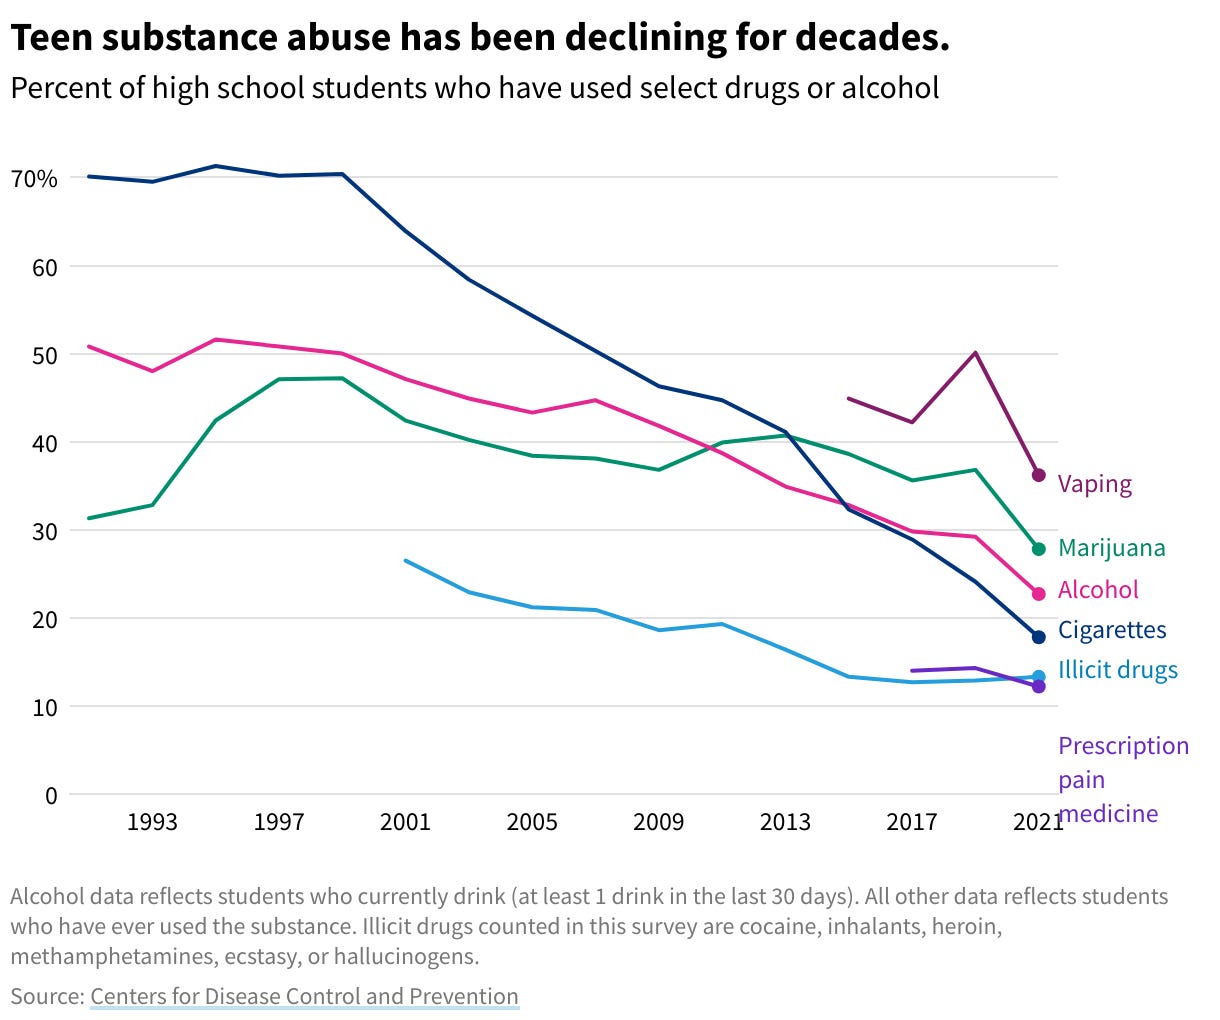 Is teen drug and alcohol use declining in the US?